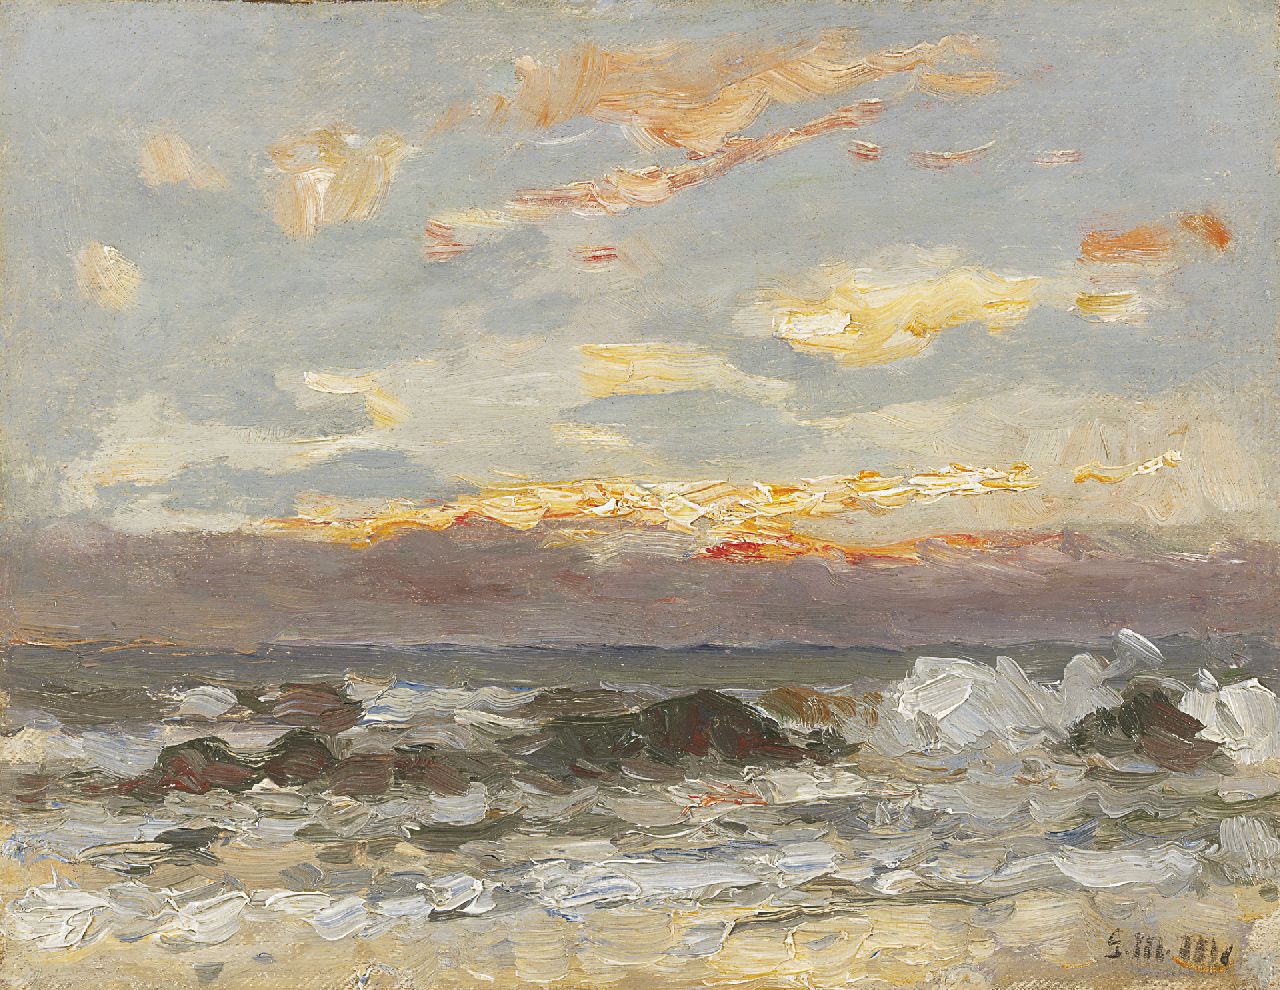 Munthe G.A.L.  | Gerhard Arij Ludwig 'Morgenstjerne' Munthe, Sunset over sea, oil on canvas laid down on panel 23.8 x 30.4 cm, signed l.r. with initials